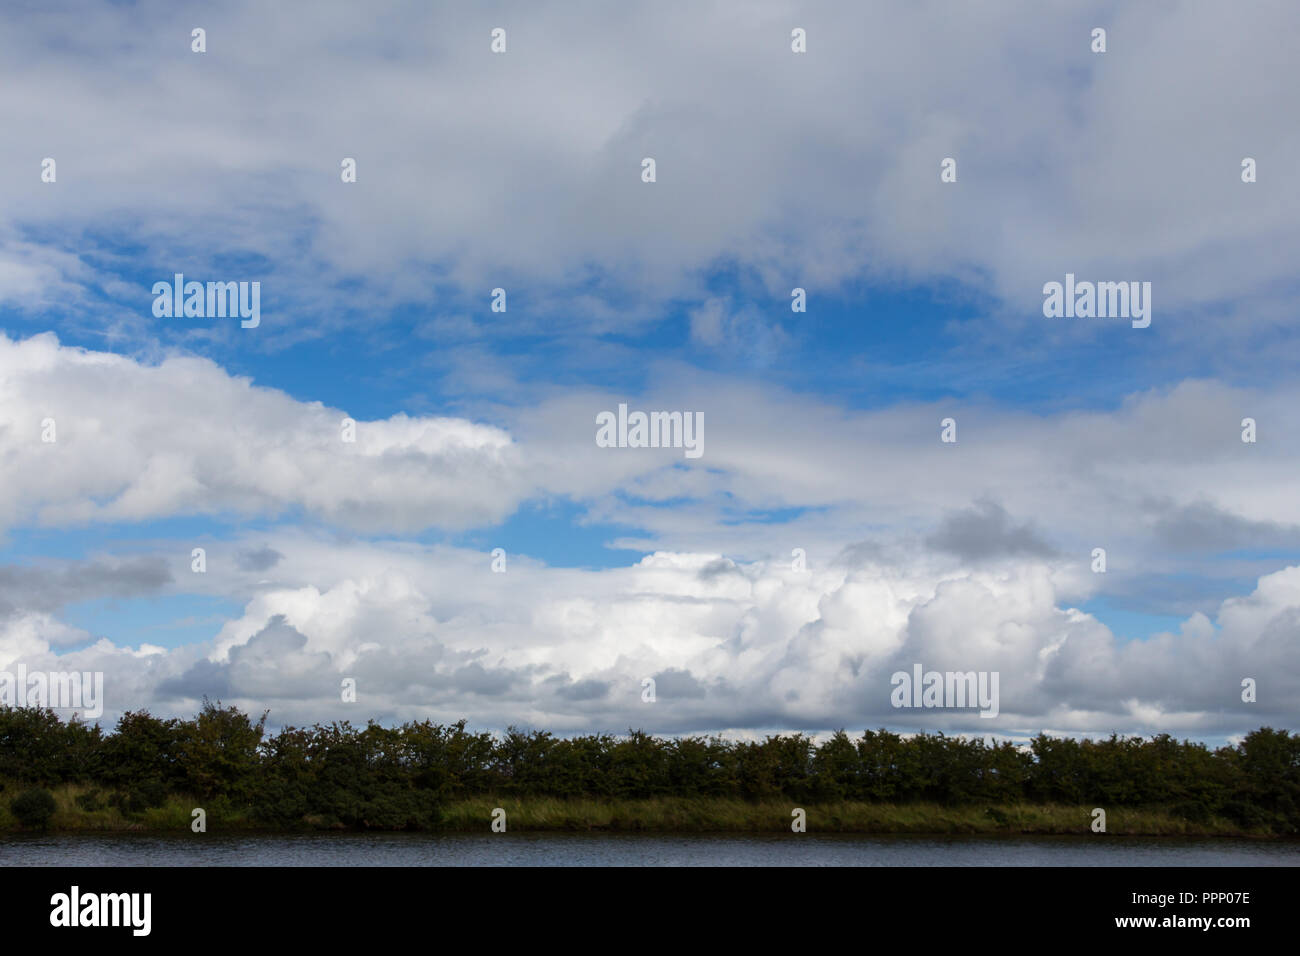 Blue sky and white clouds in lovely skyscape over trees and water Stock Photo